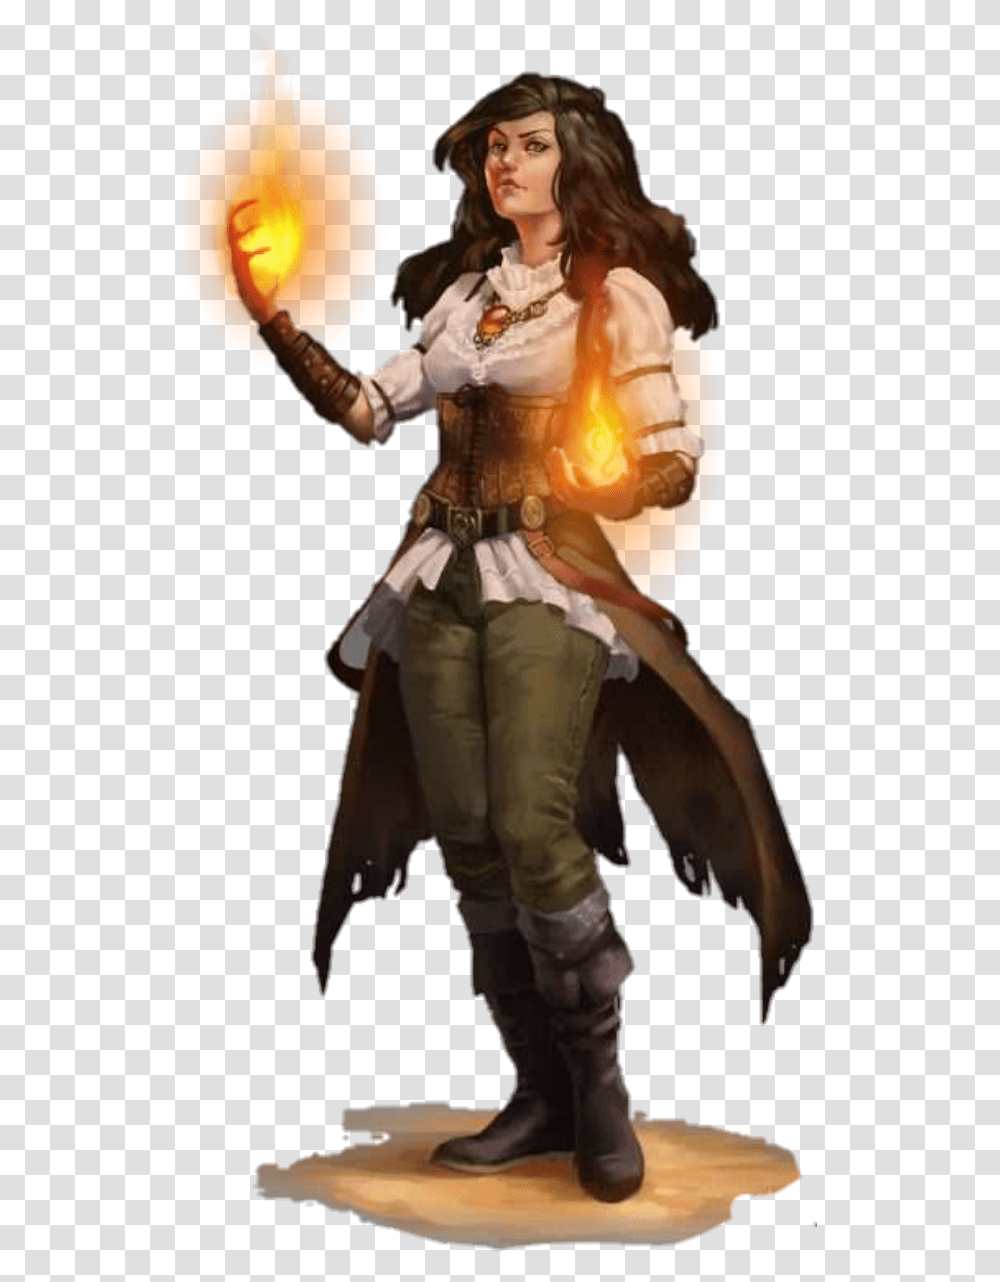 Woman Female Witch Sorceress Magic Fantasy Tube Psp Human Female Sorcerer, Person, Figurine, People, Clothing Transparent Png